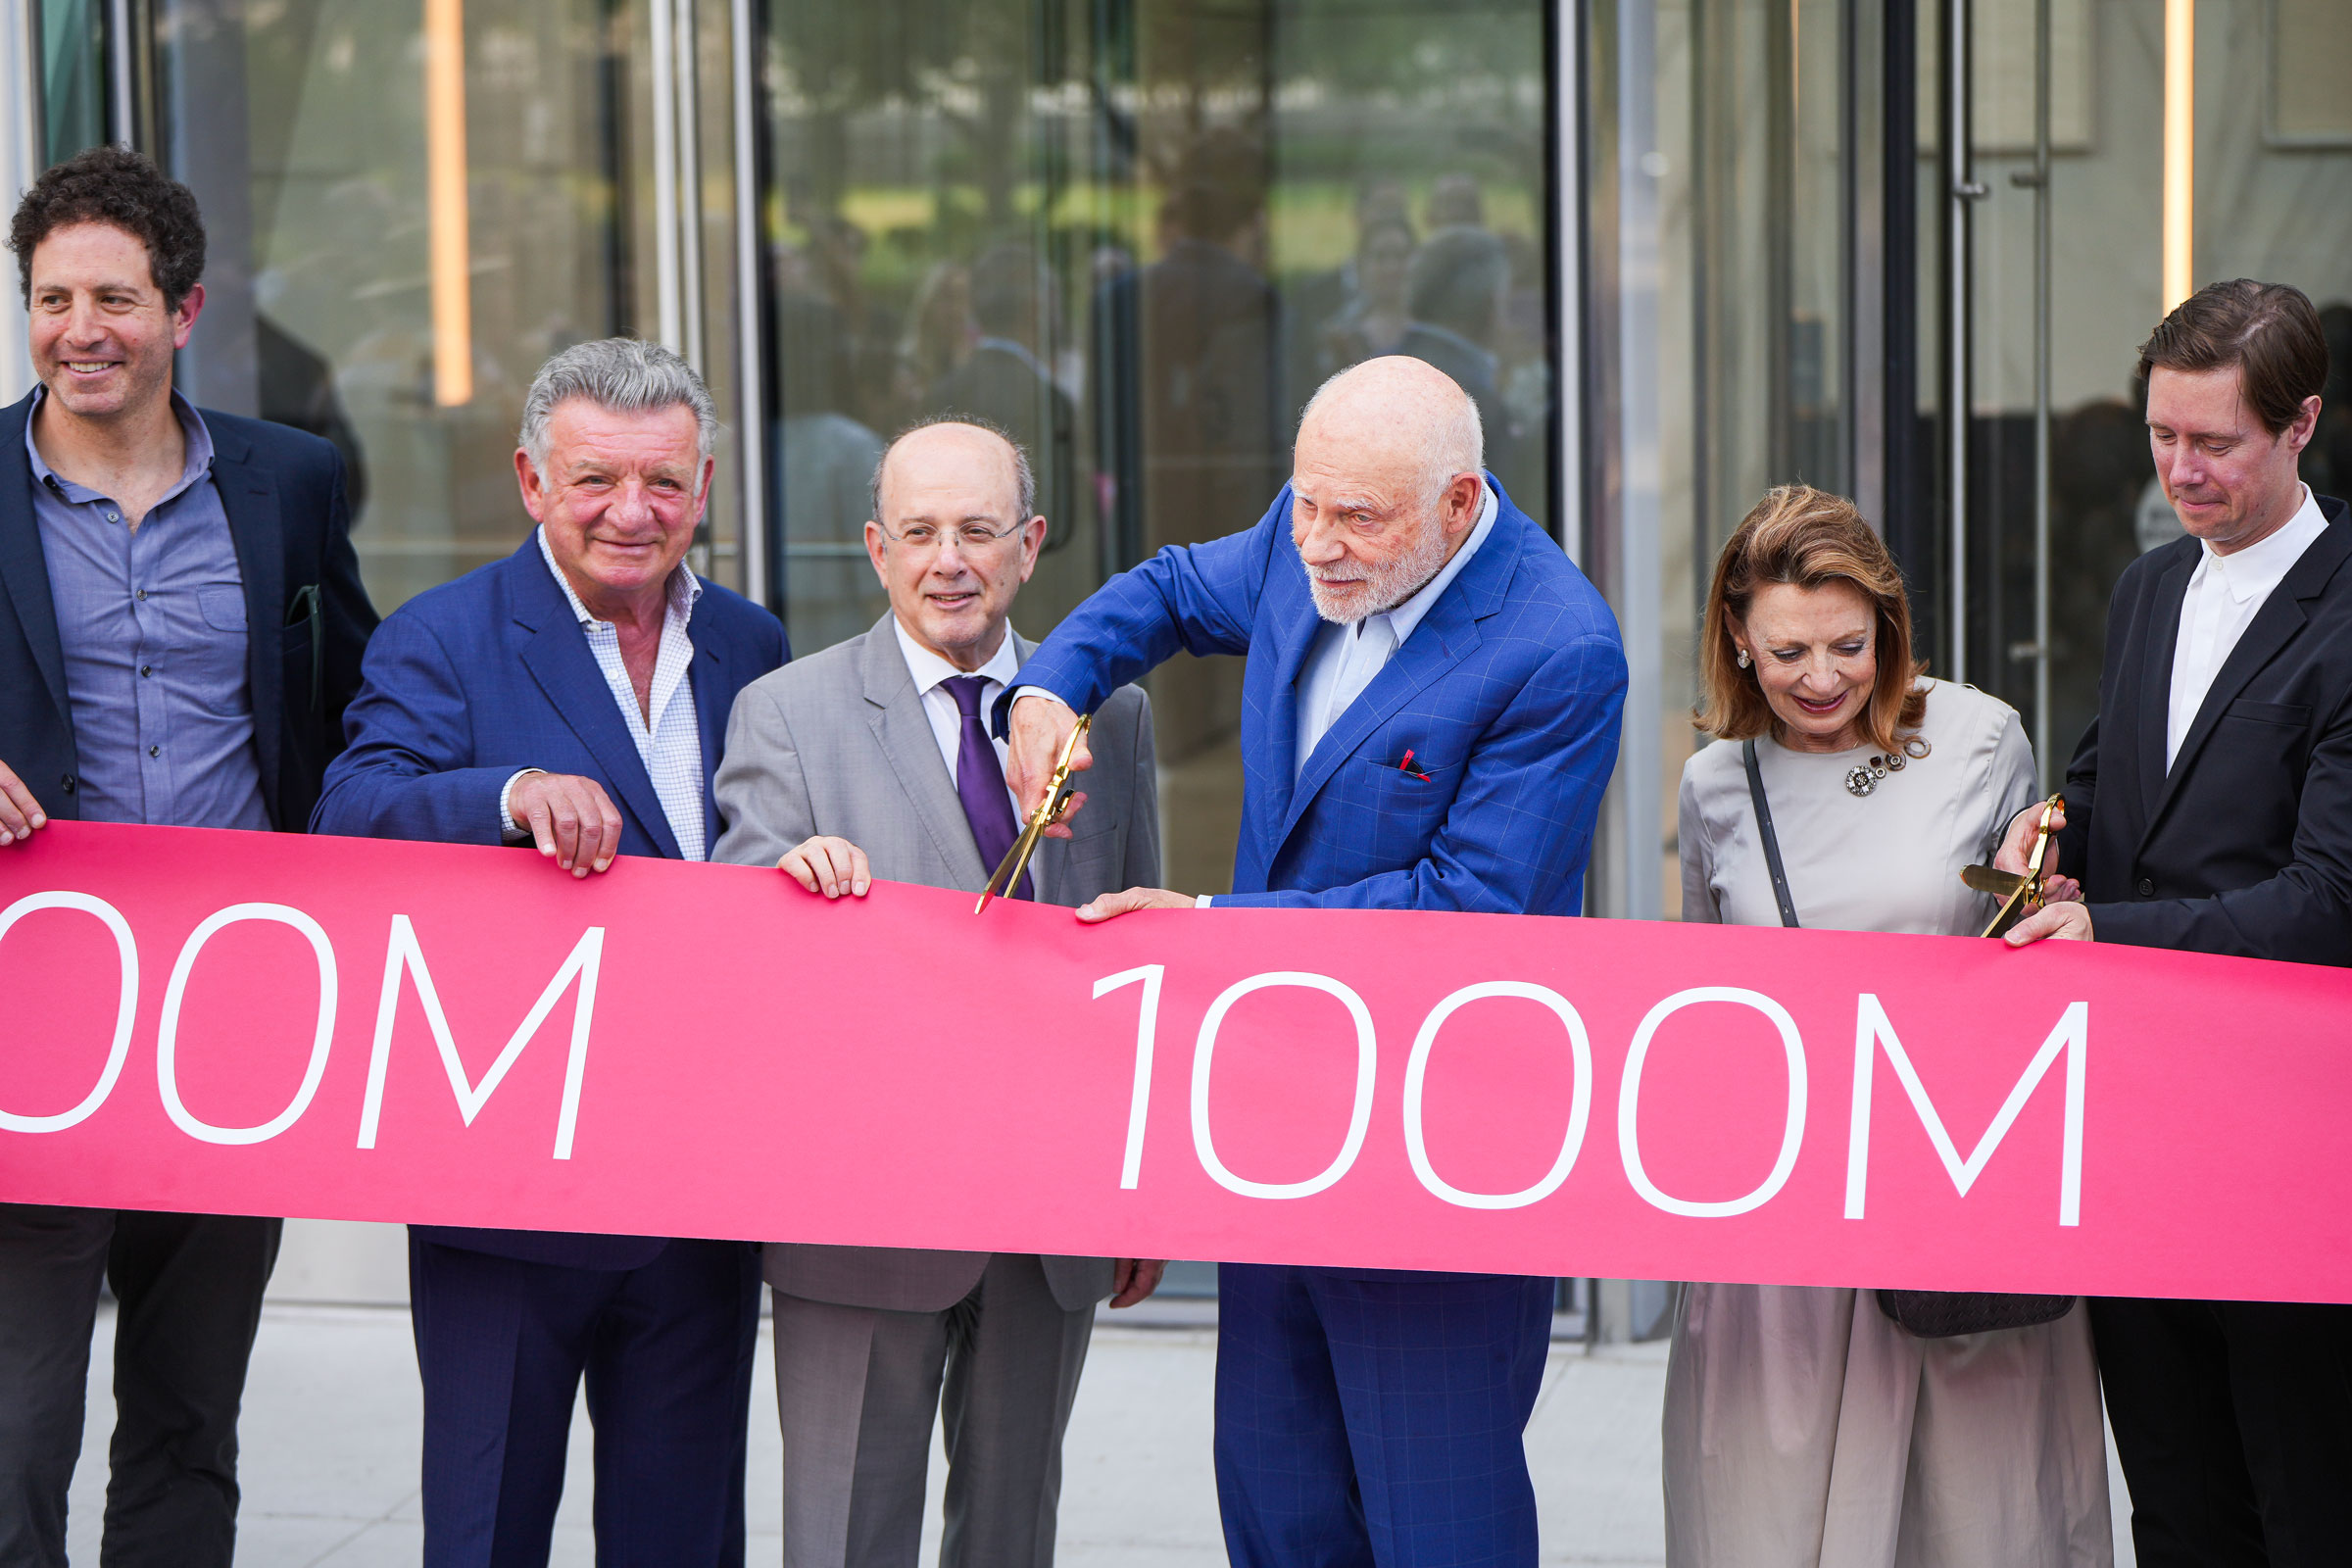 1000M Grand Opening Ribbon Cutting Ceremony